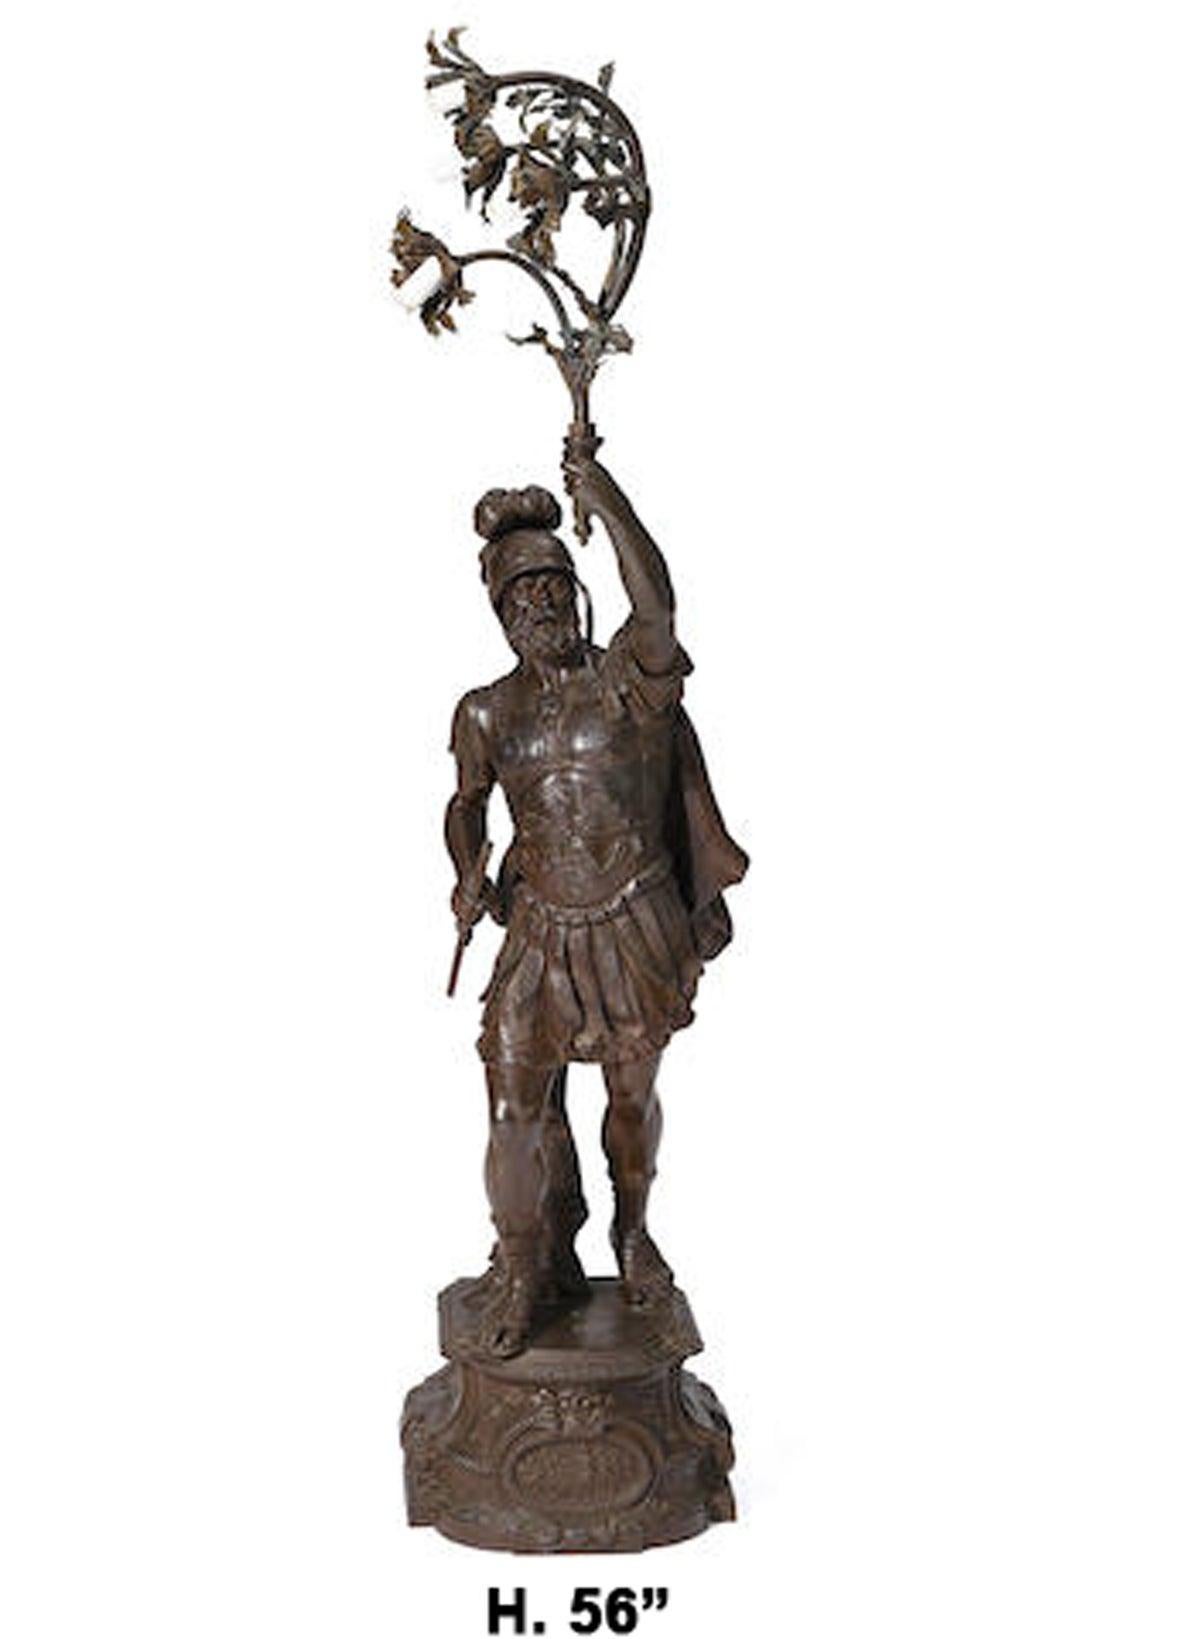 Exquisite French Roman centurion figural torchiere lamp. Signed Lion P.
19th century.

A fine bronzed patina metal sculpture depicting a centurion dressed in traditional Roman warrior gear wielding a foliate bough issuing four flower heads,